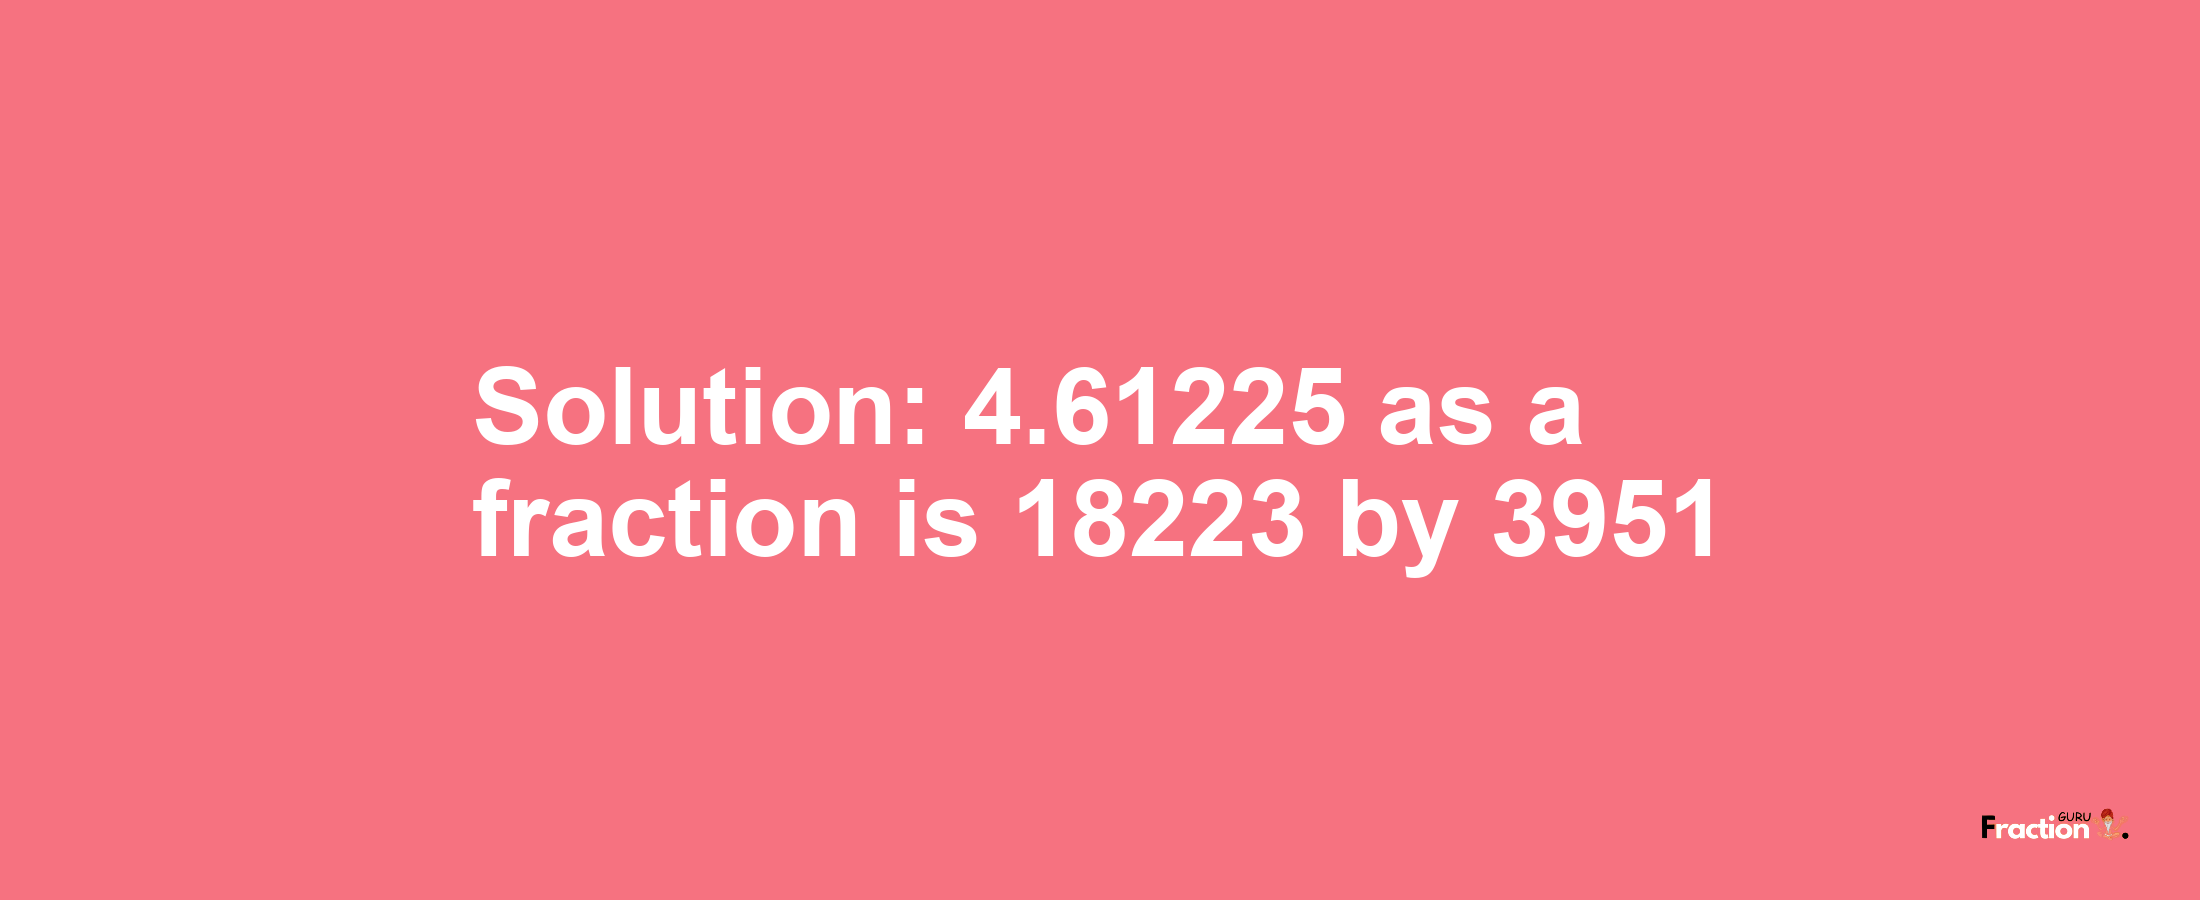 Solution:4.61225 as a fraction is 18223/3951